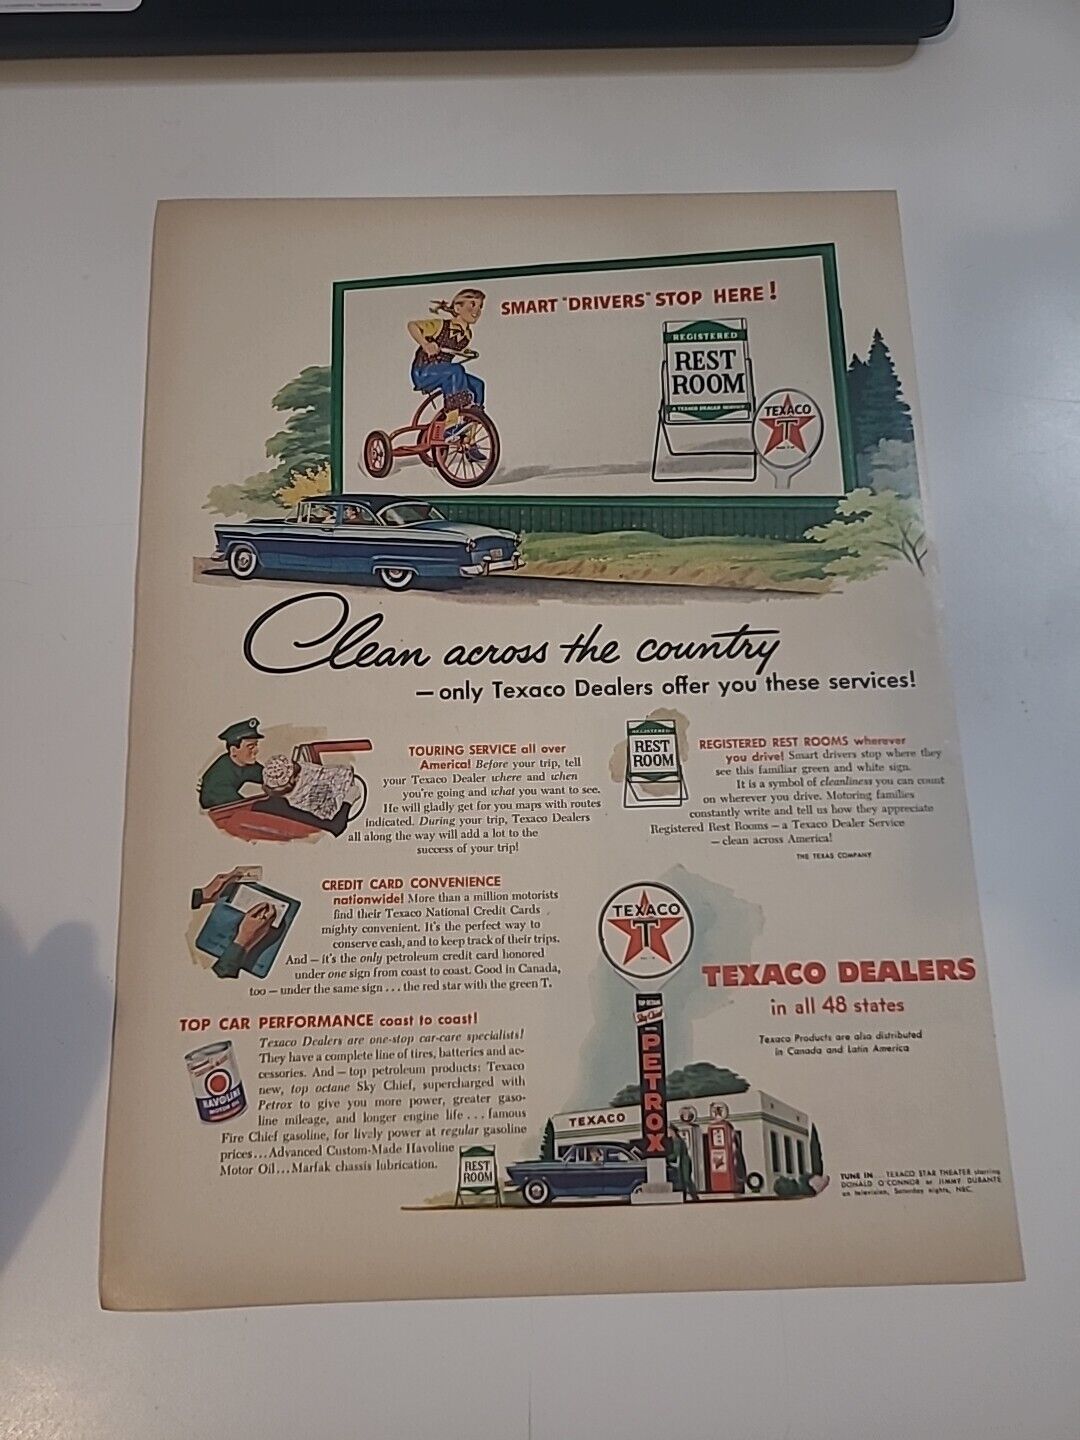 Texaco Dealers Gas Station Pack print ad 1955 Vintage 10x13 